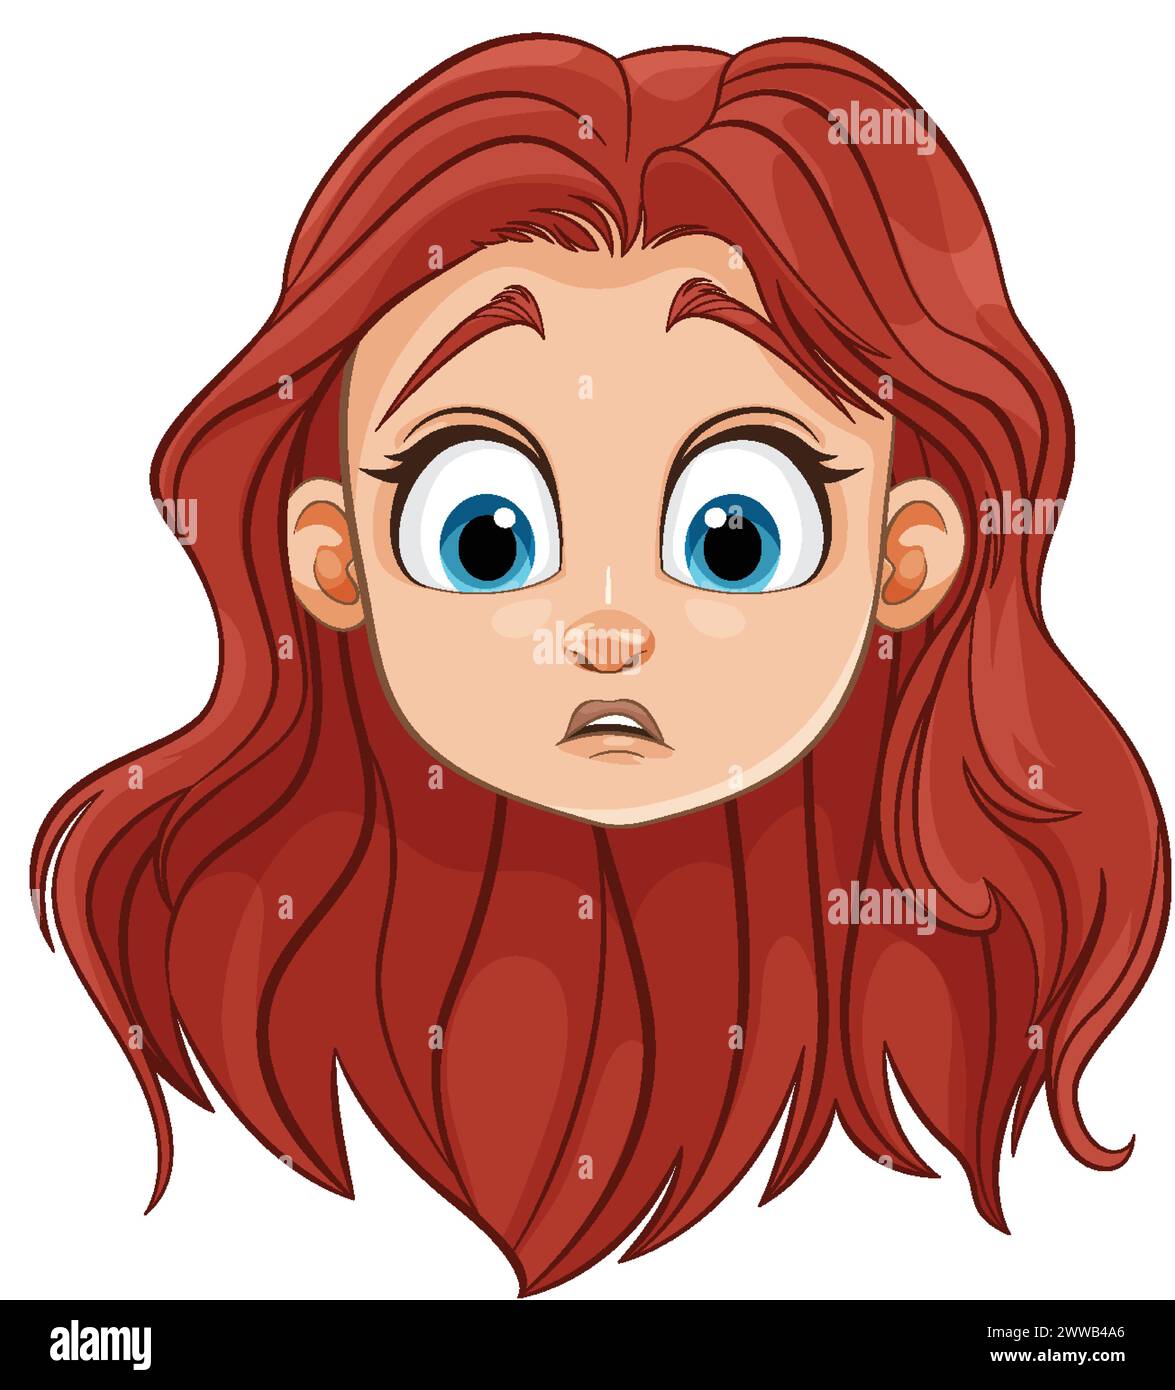 Vector illustration of a surprised young girl Stock Vector